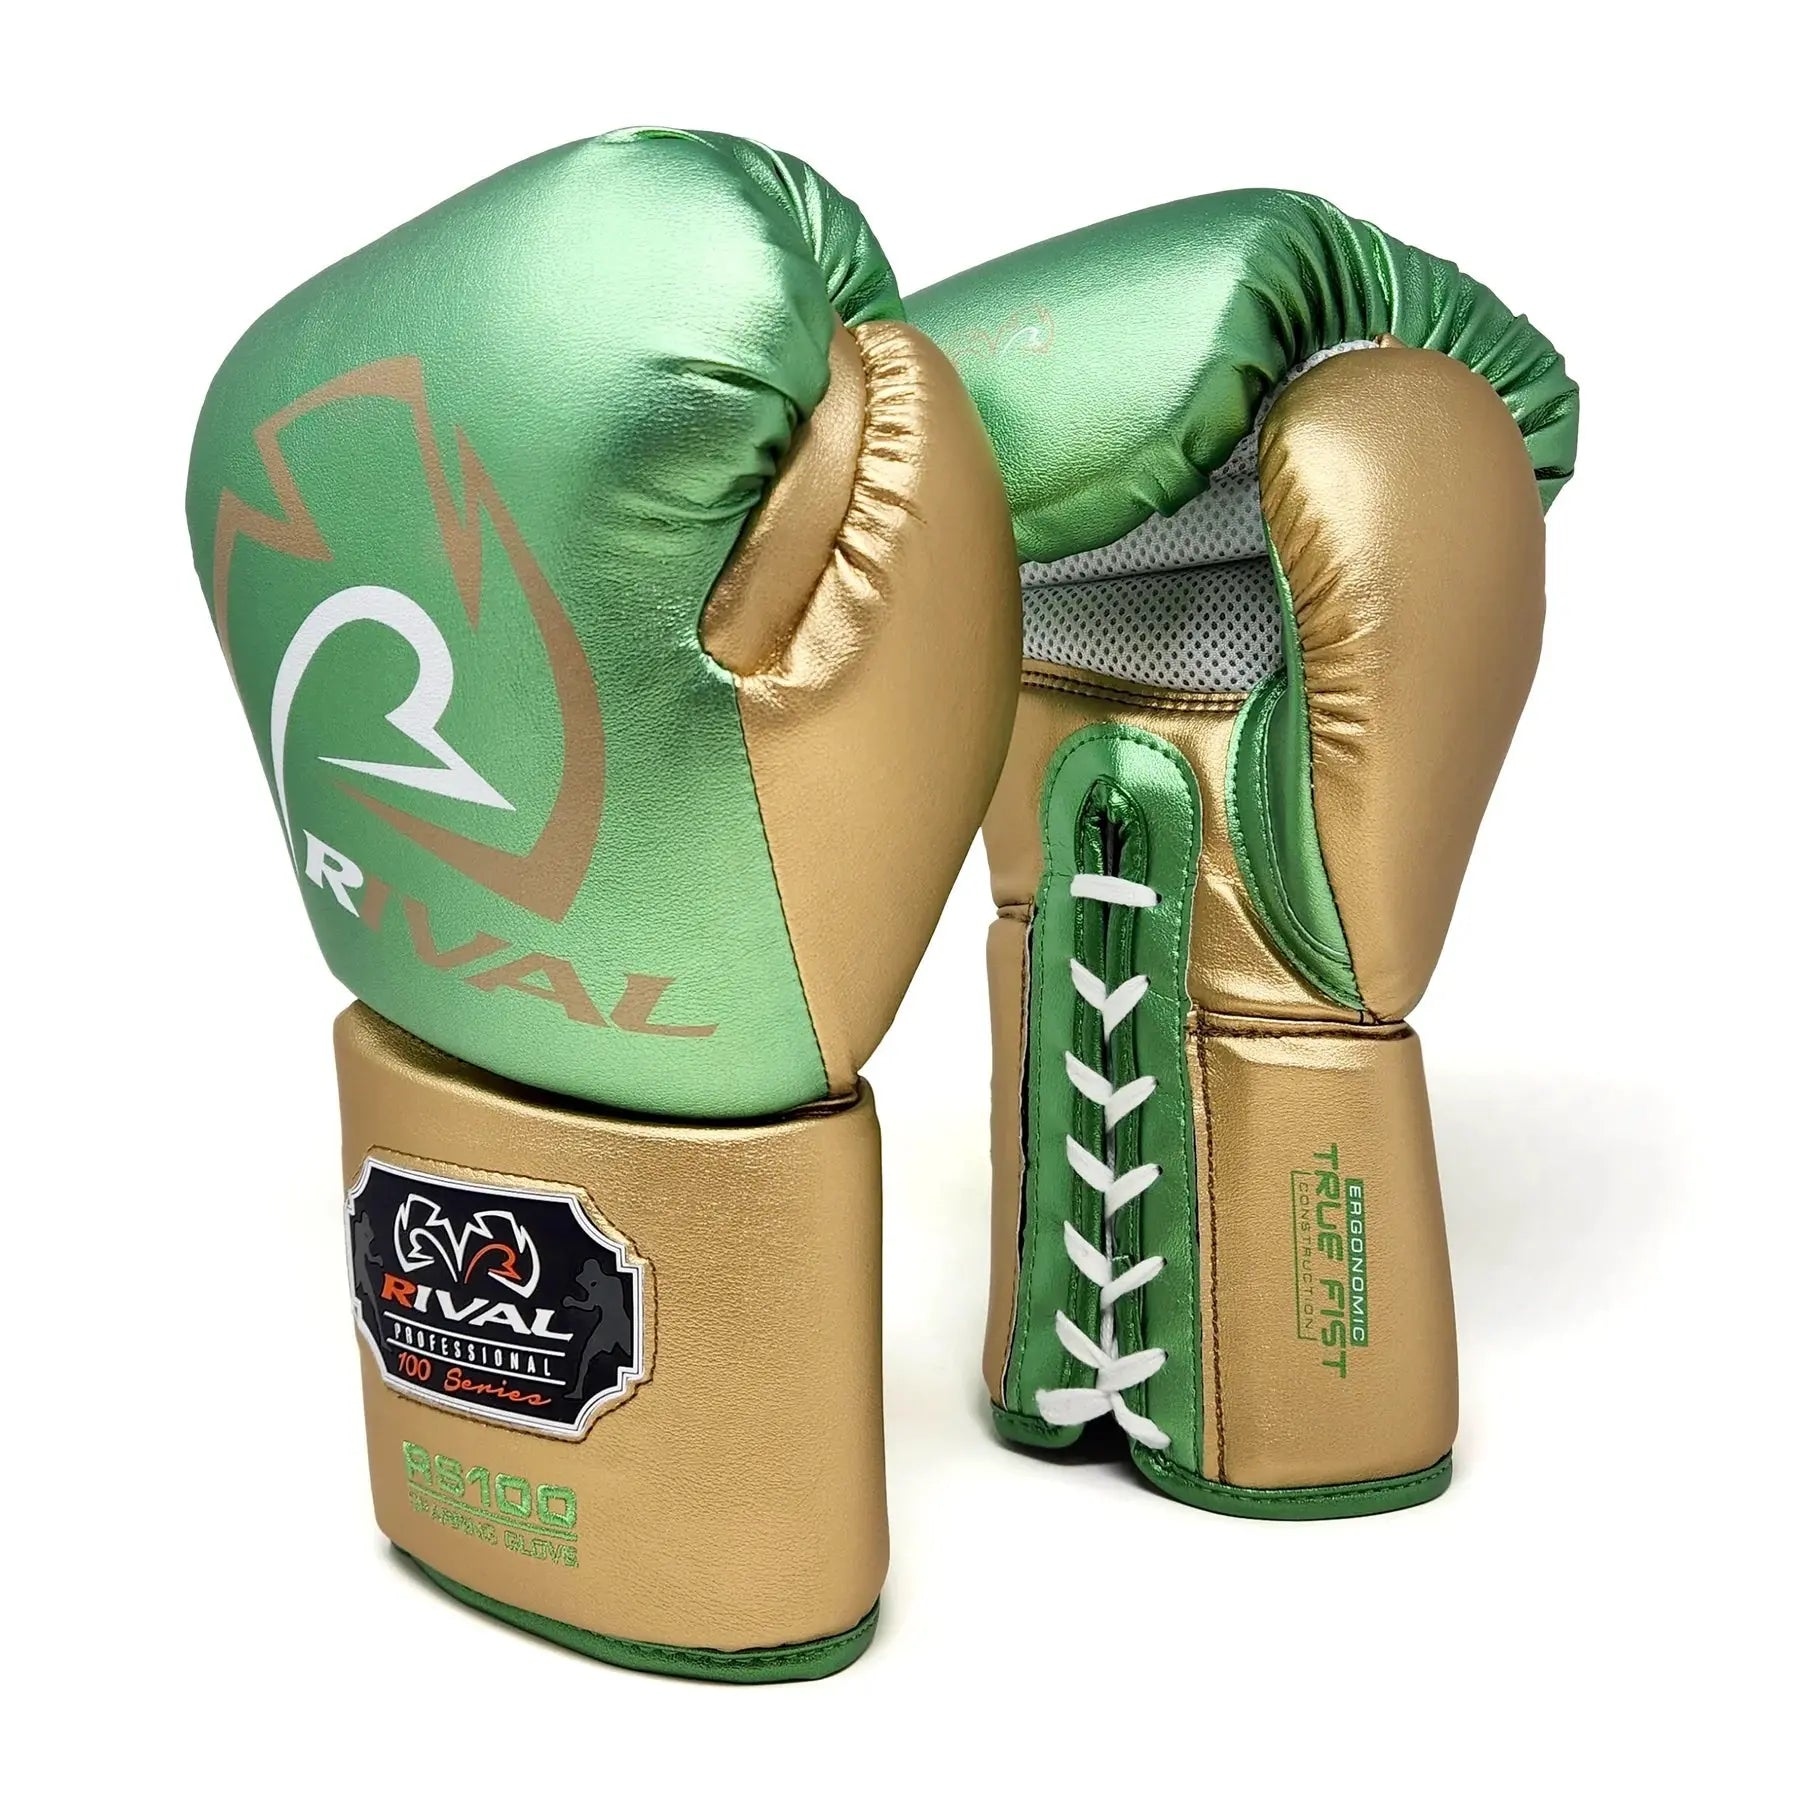 Guantes de sparring Rival RS60V Workout 2.0 – Rival Boxing Gear Spain